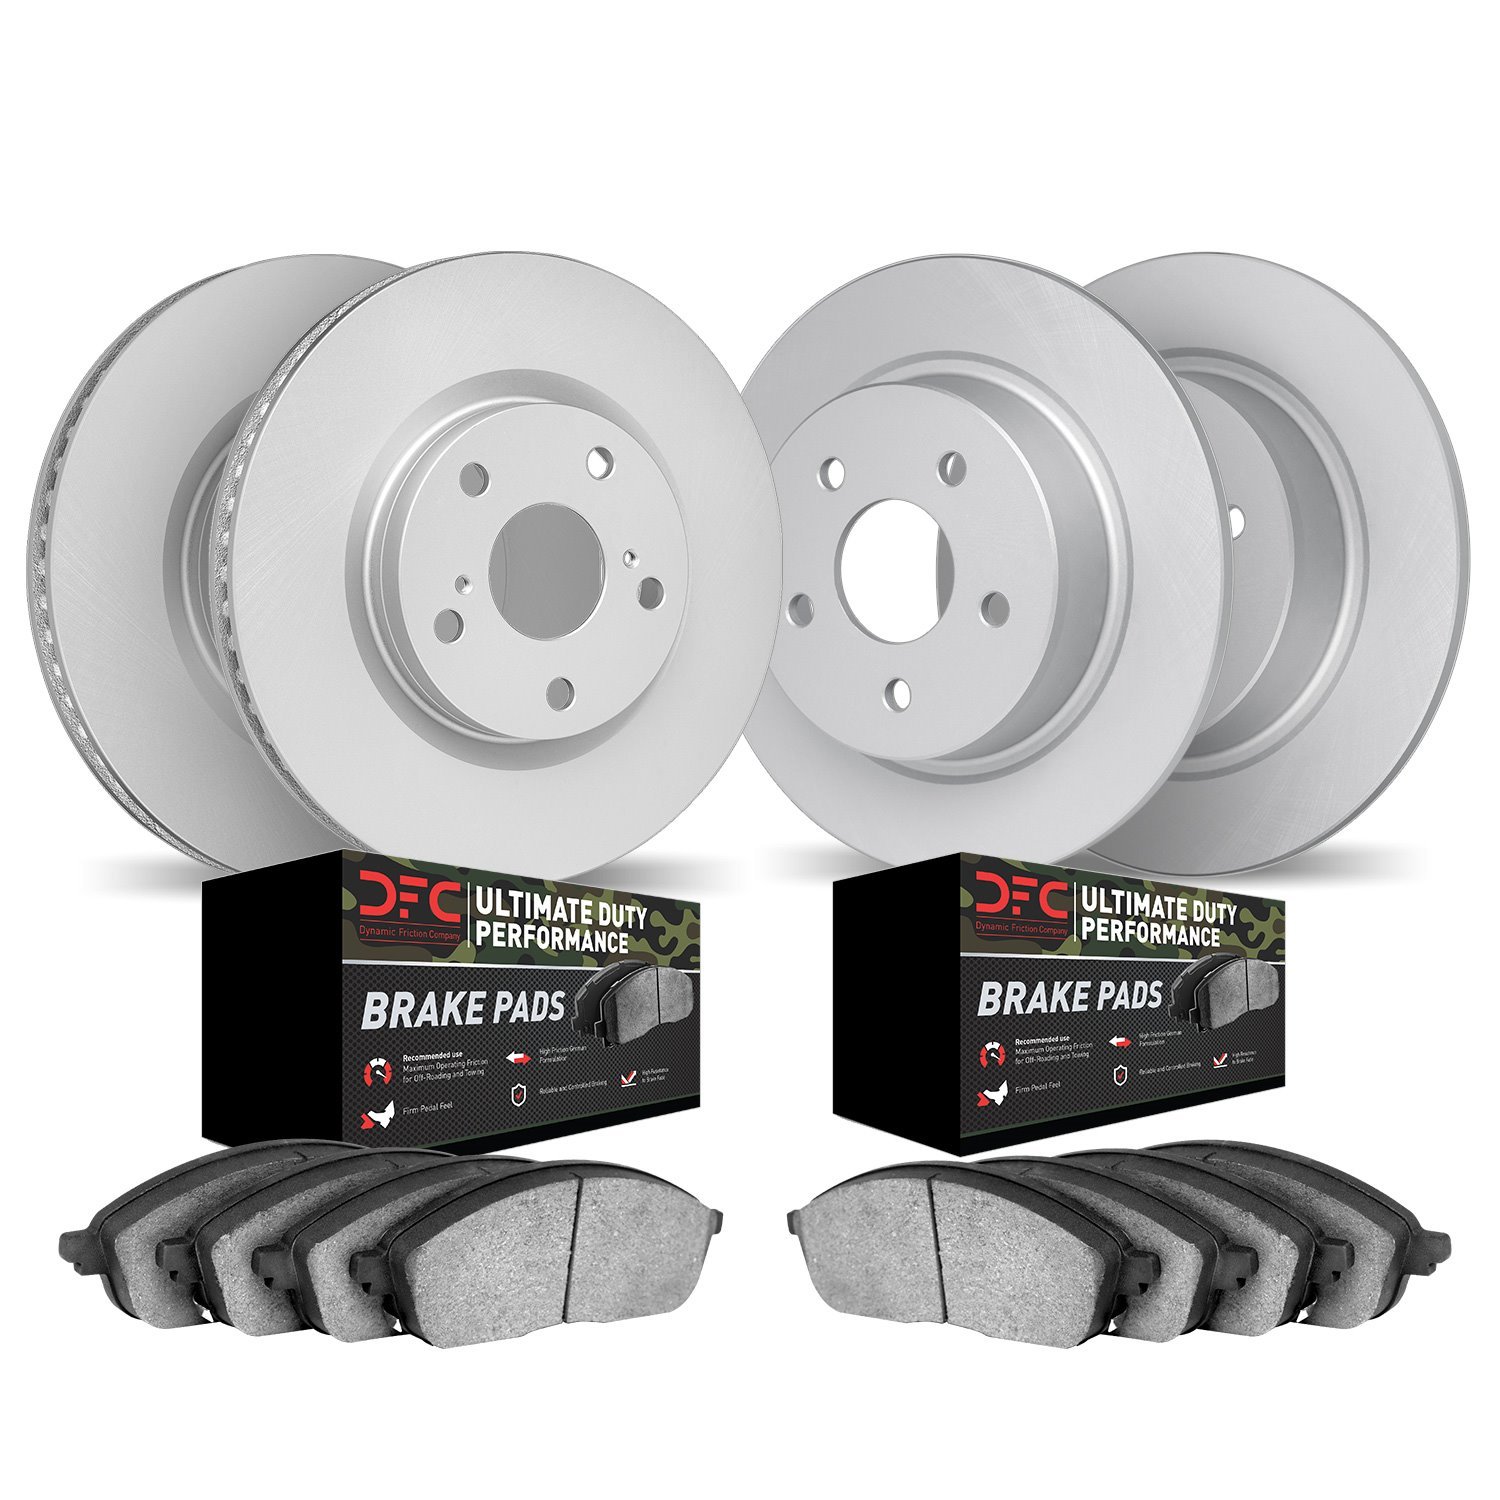 4404-42007 Geospec Brake Rotors with Ultimate-Duty Brake Pads Kit, Fits Select Mopar, Position: Front and Rear